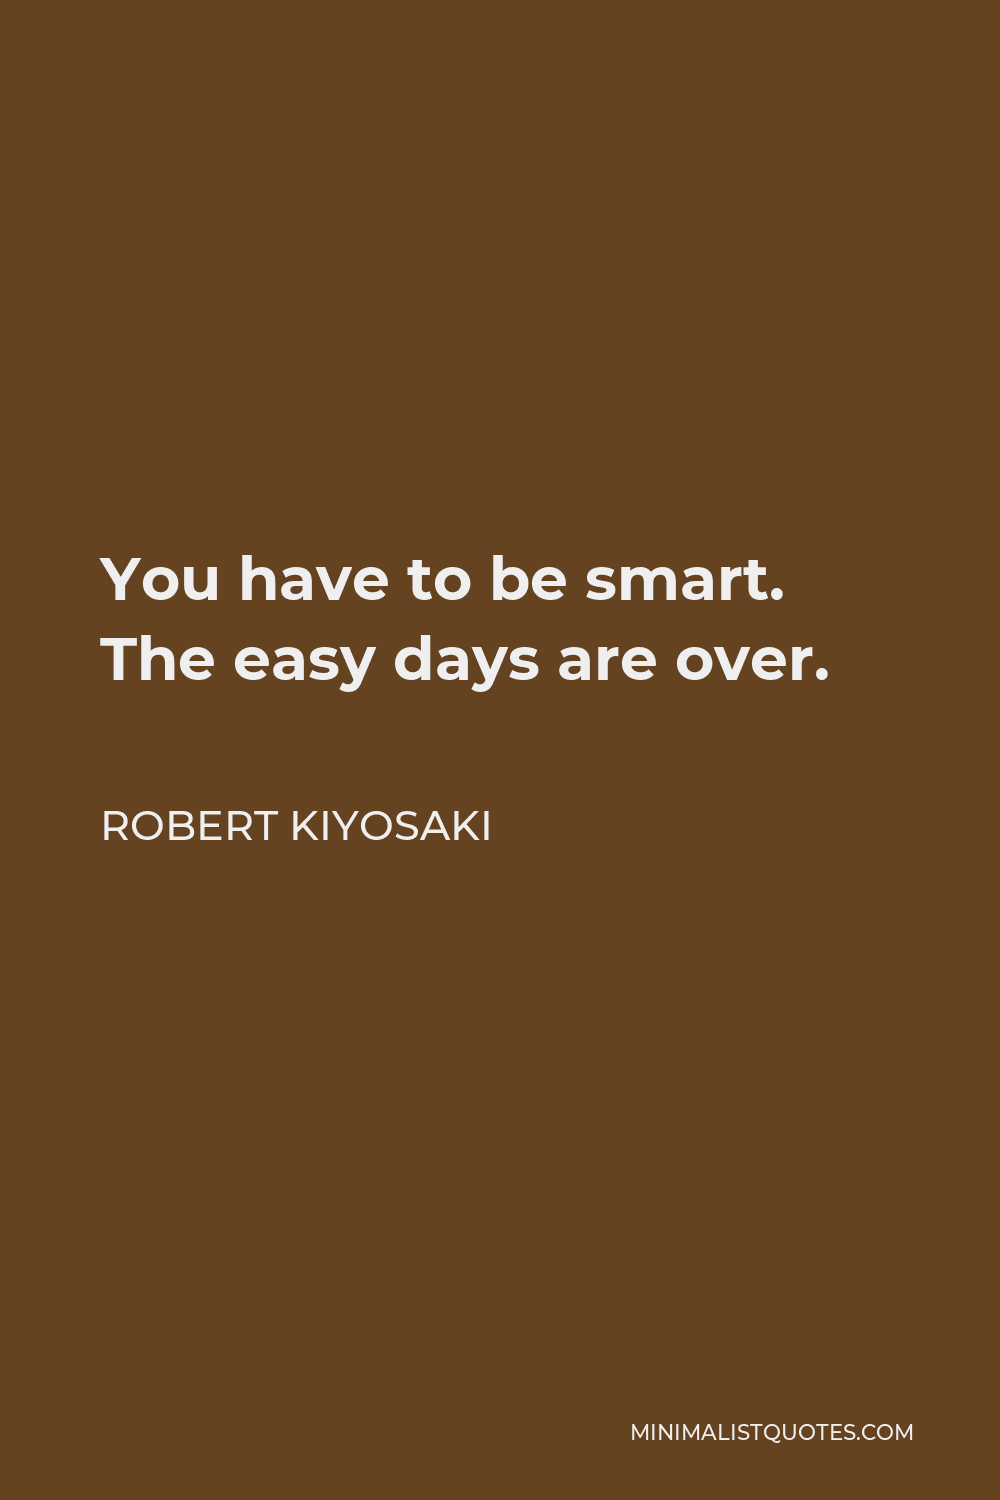 Robert Kiyosaki Quote - You have to be smart. The easy days are over.